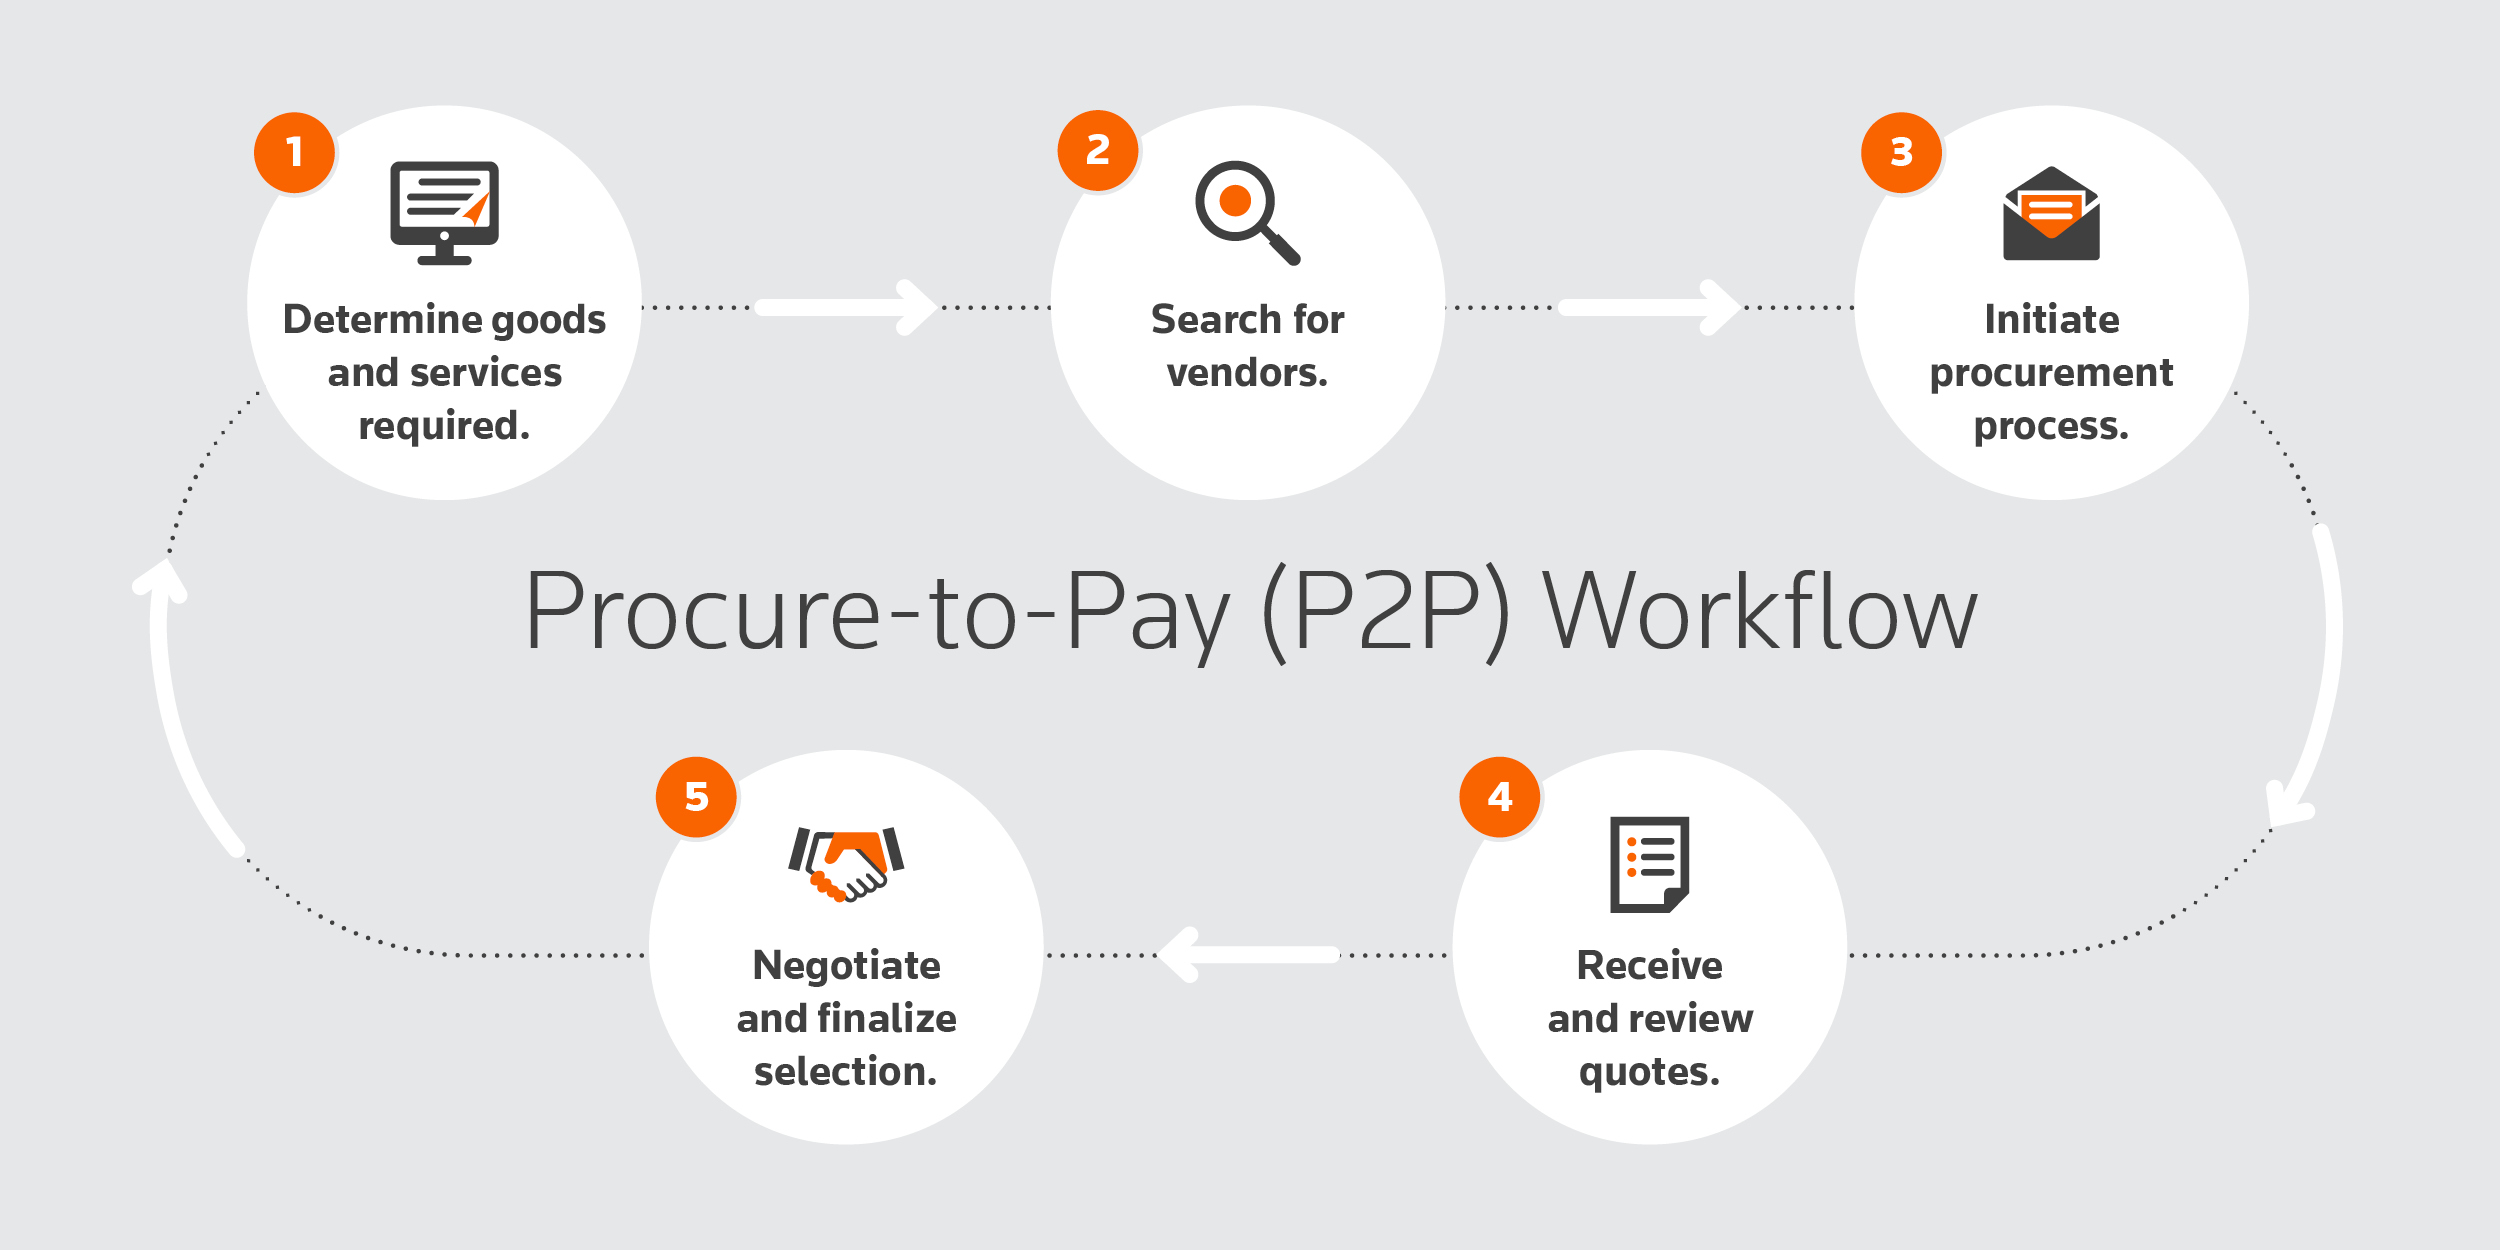 Chart explaining the procure to pay workflow process.